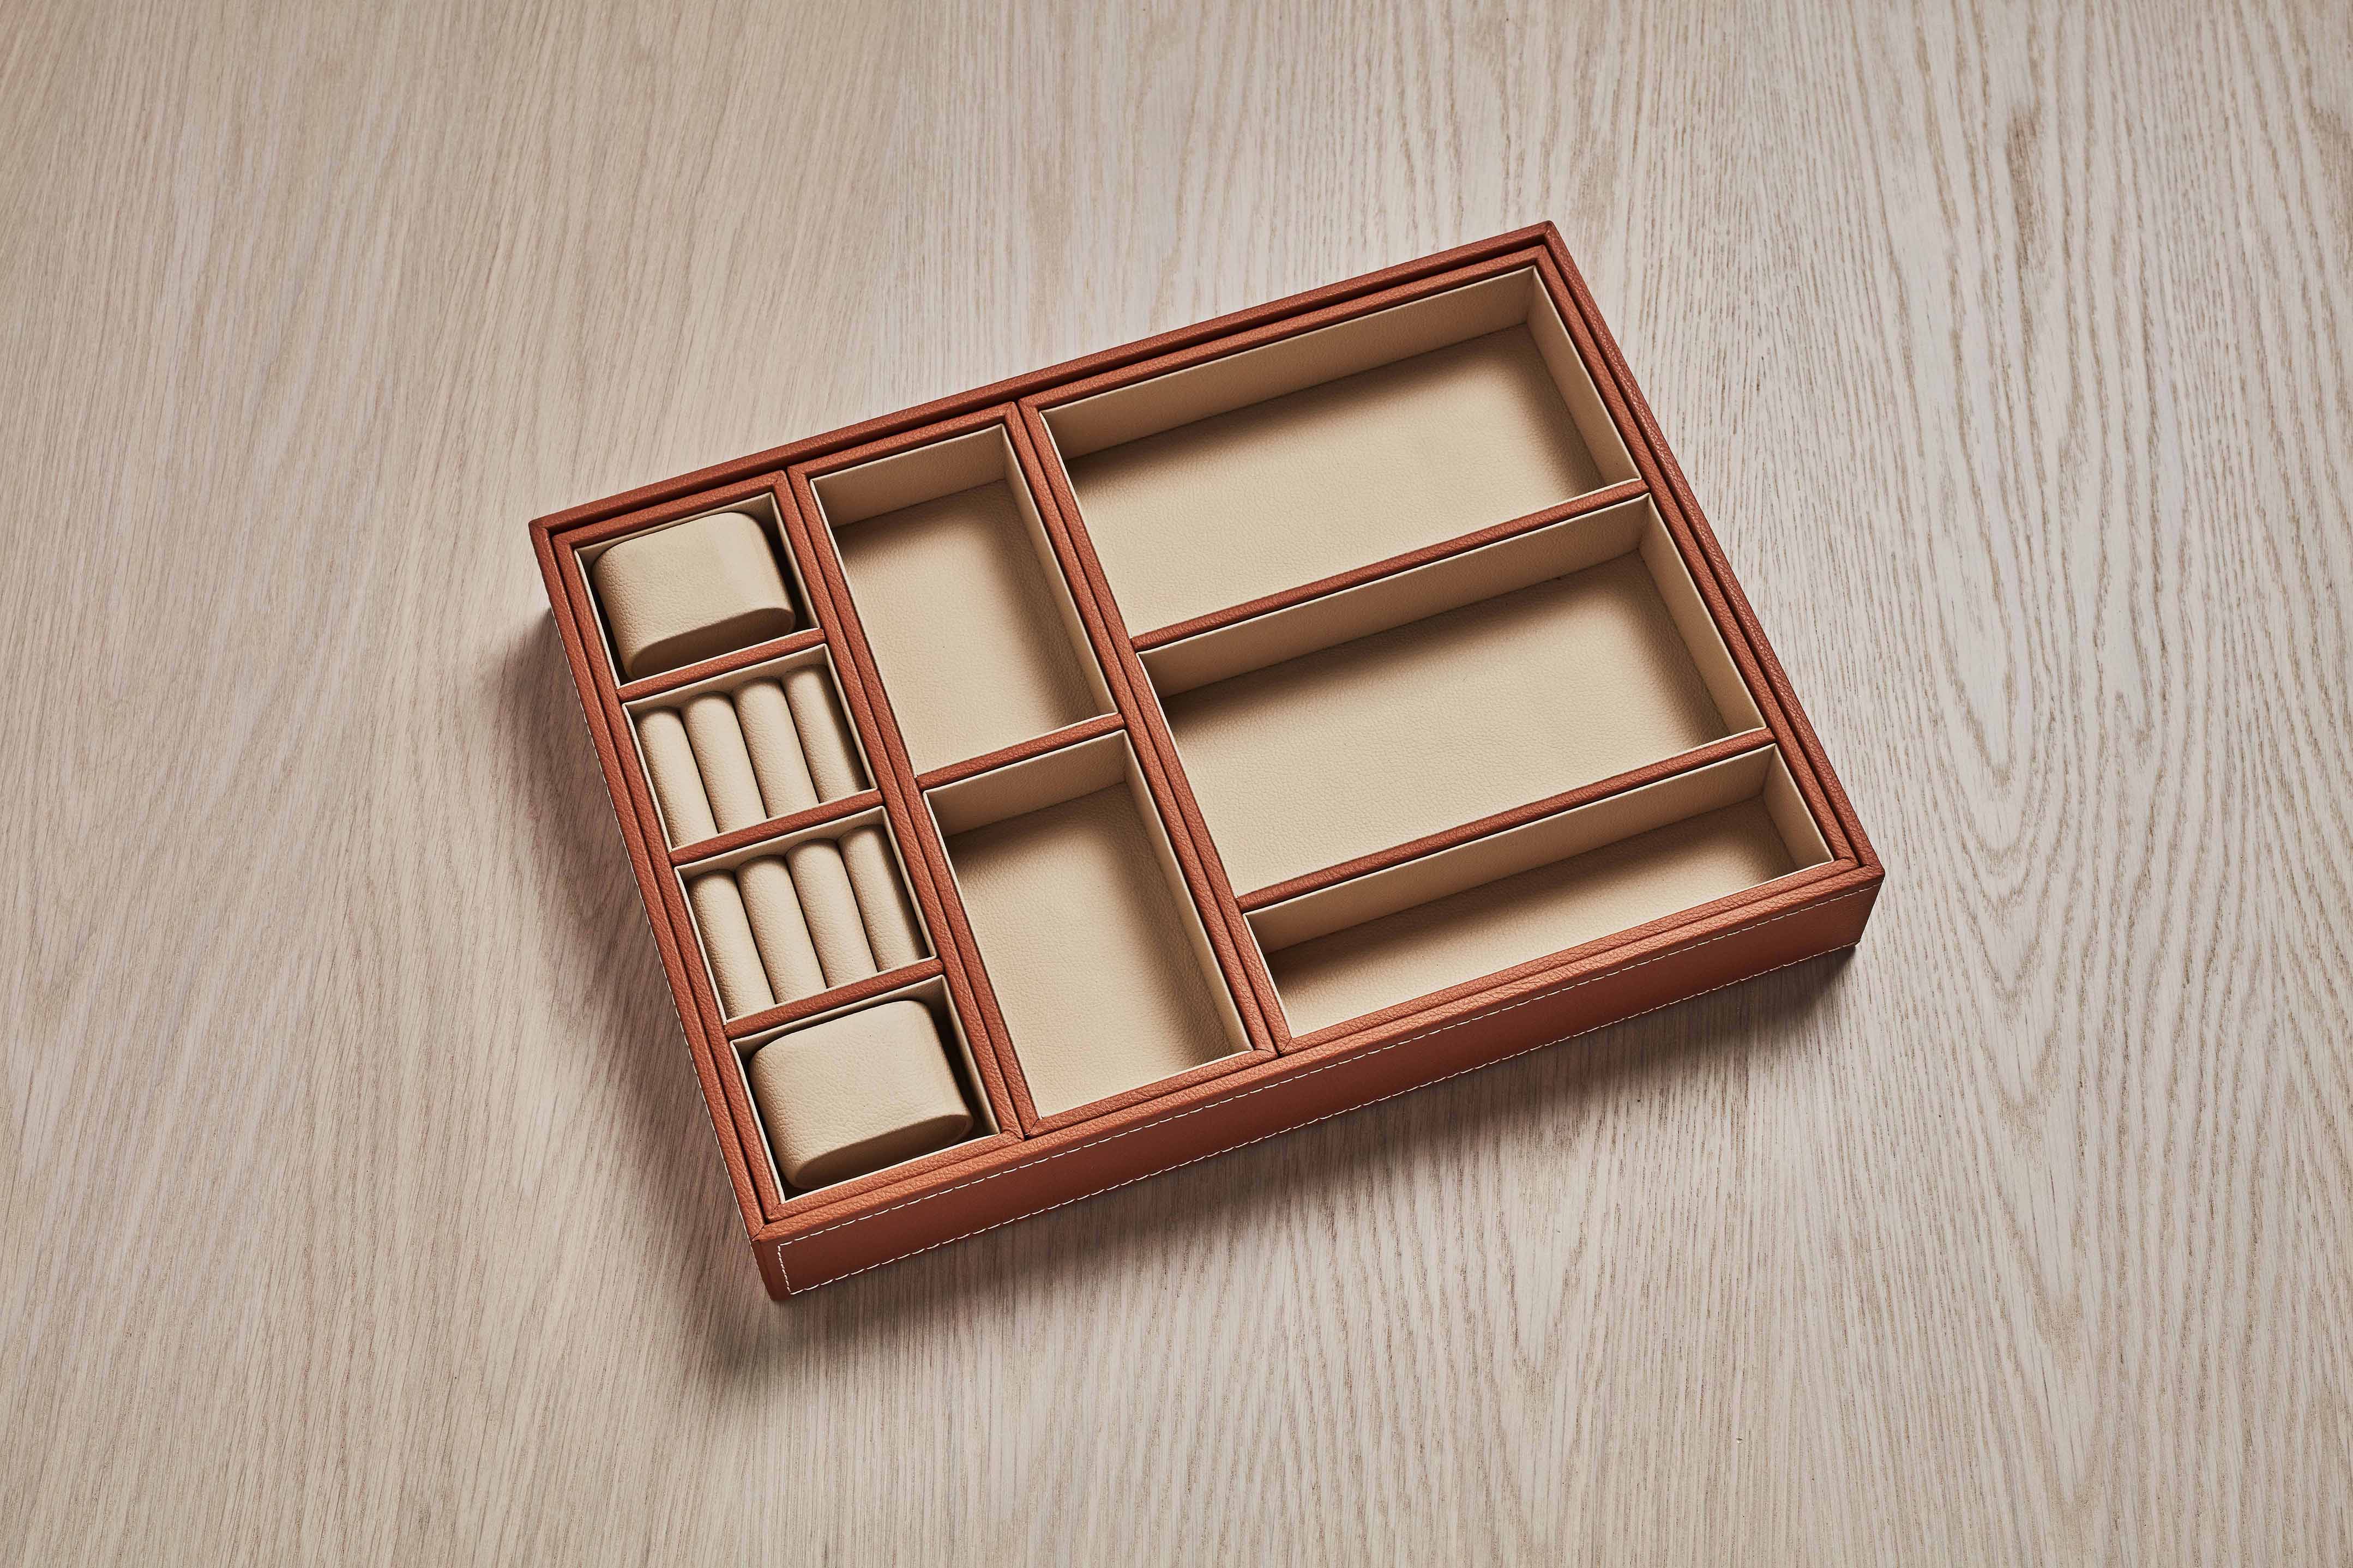 ISSY Beauty Solution Everyday Organisation - Zuster Furniture